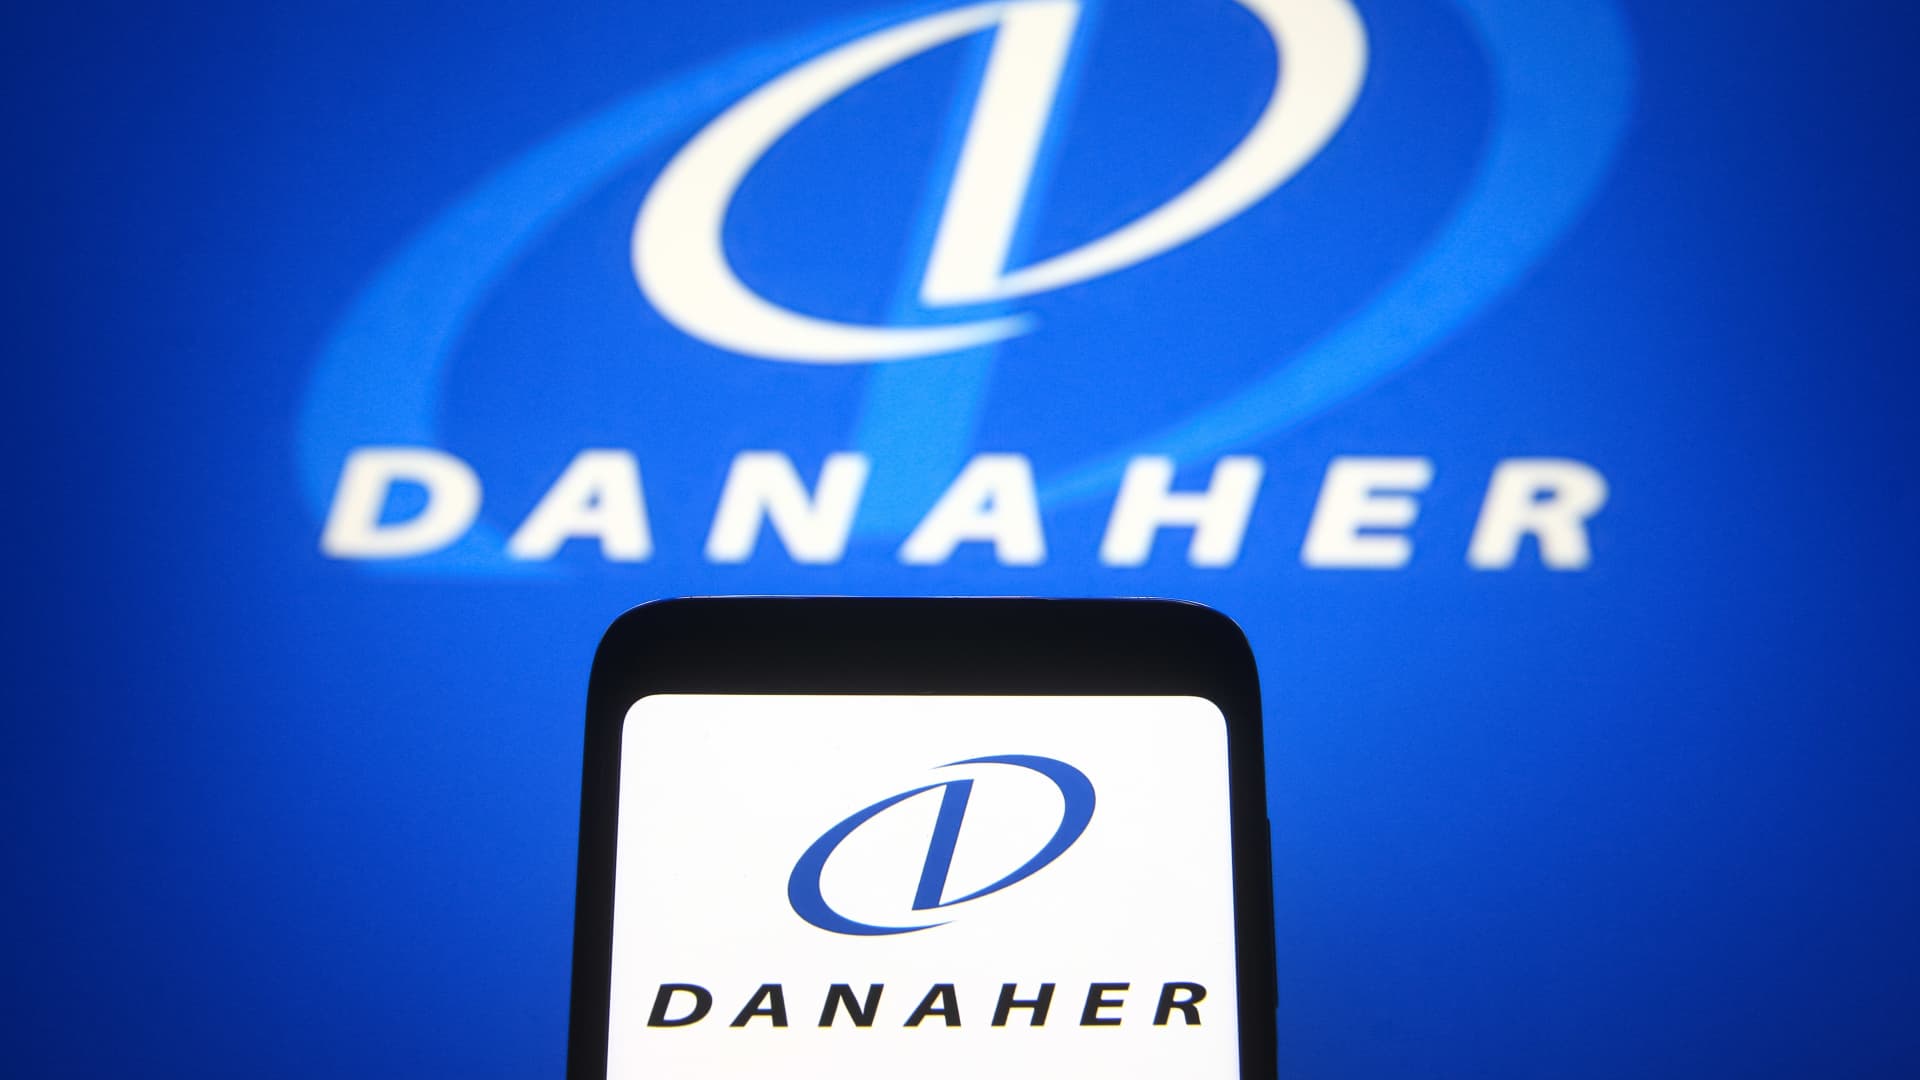 Buy Danaher as medical company’s valuation offers an attractive entry point, RBC says